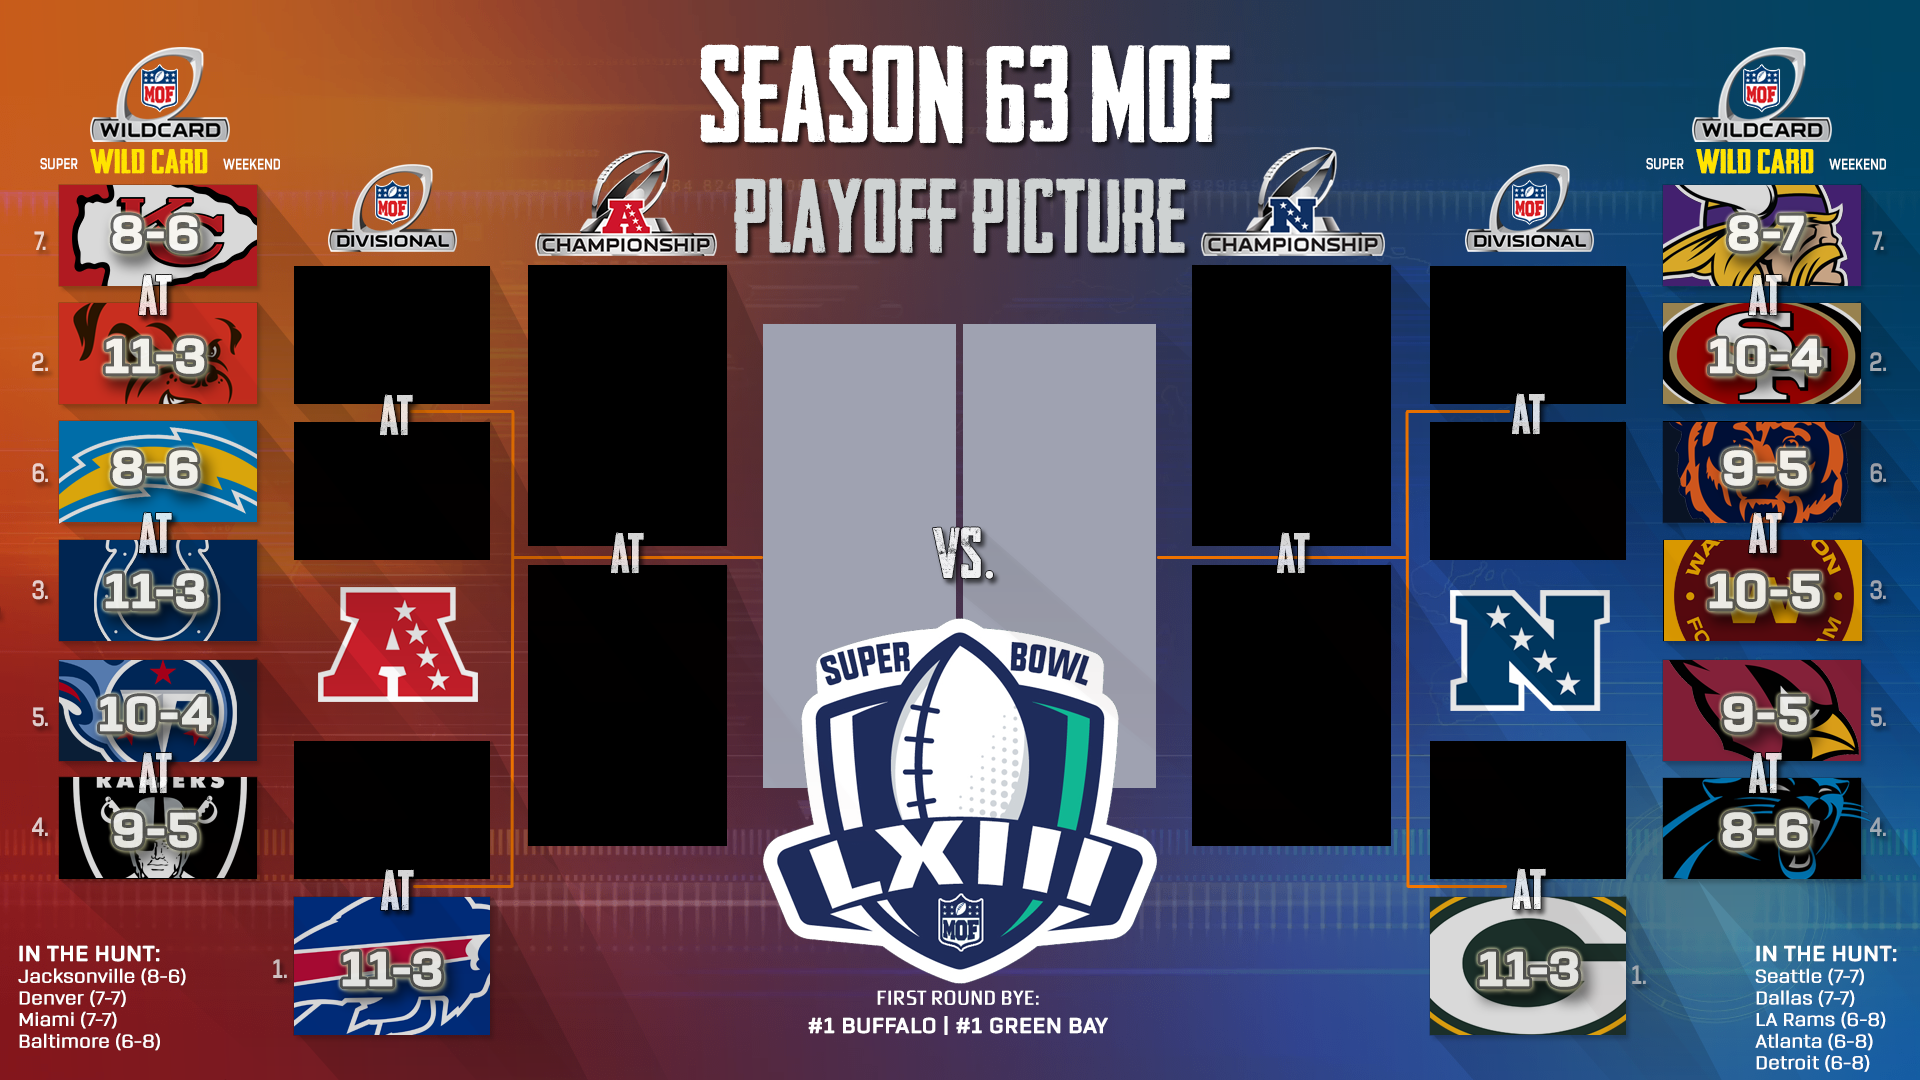 MOF Playoff Picture